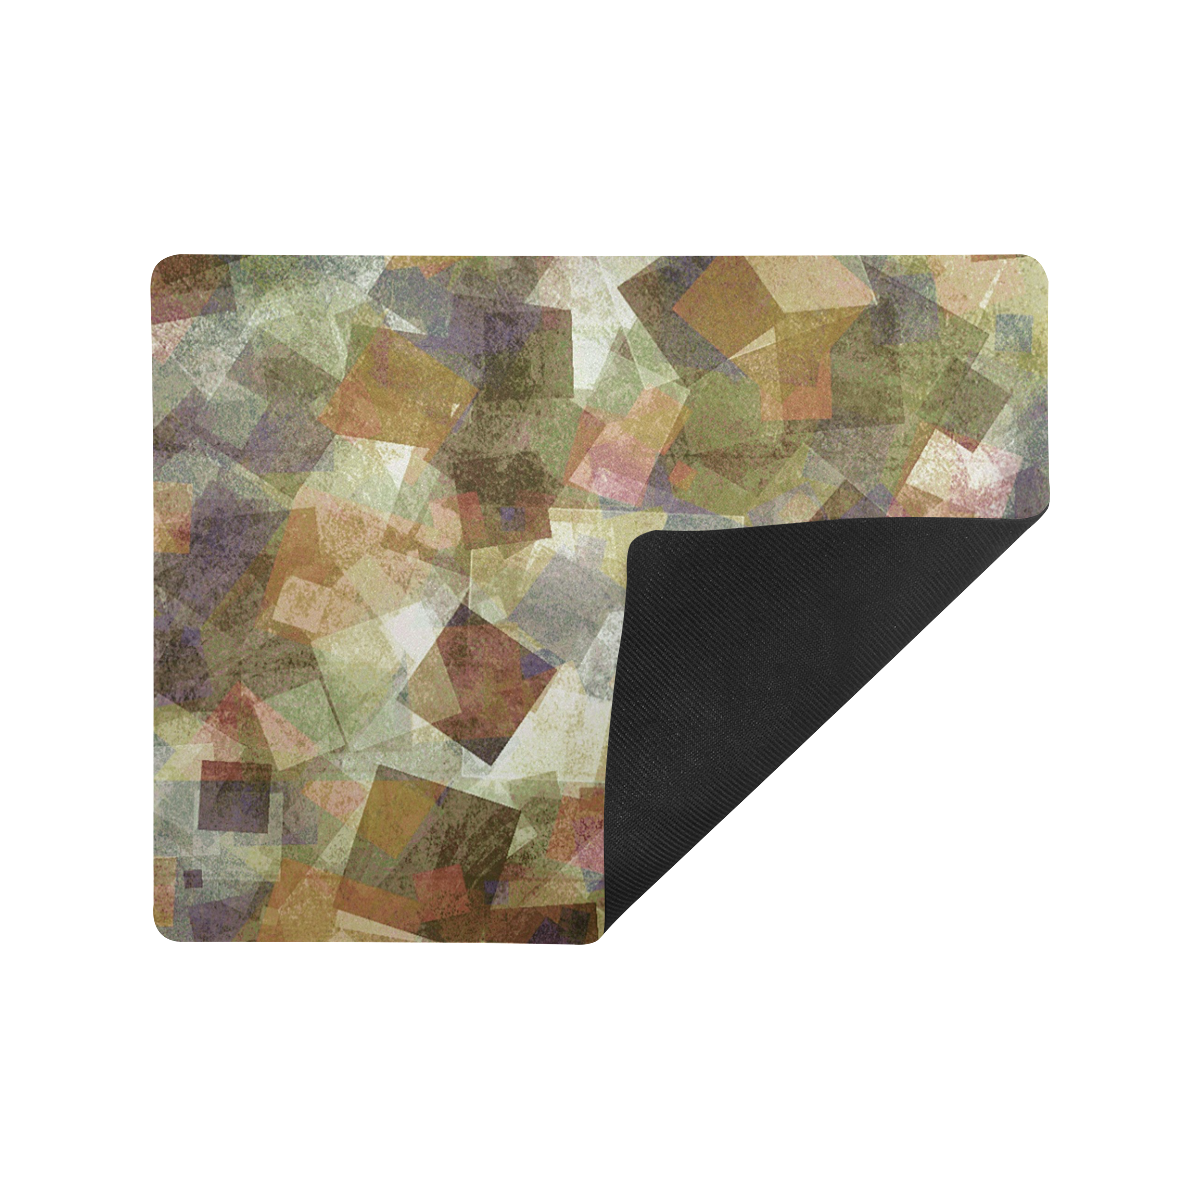 abstract squares Mousepad 18"x14"